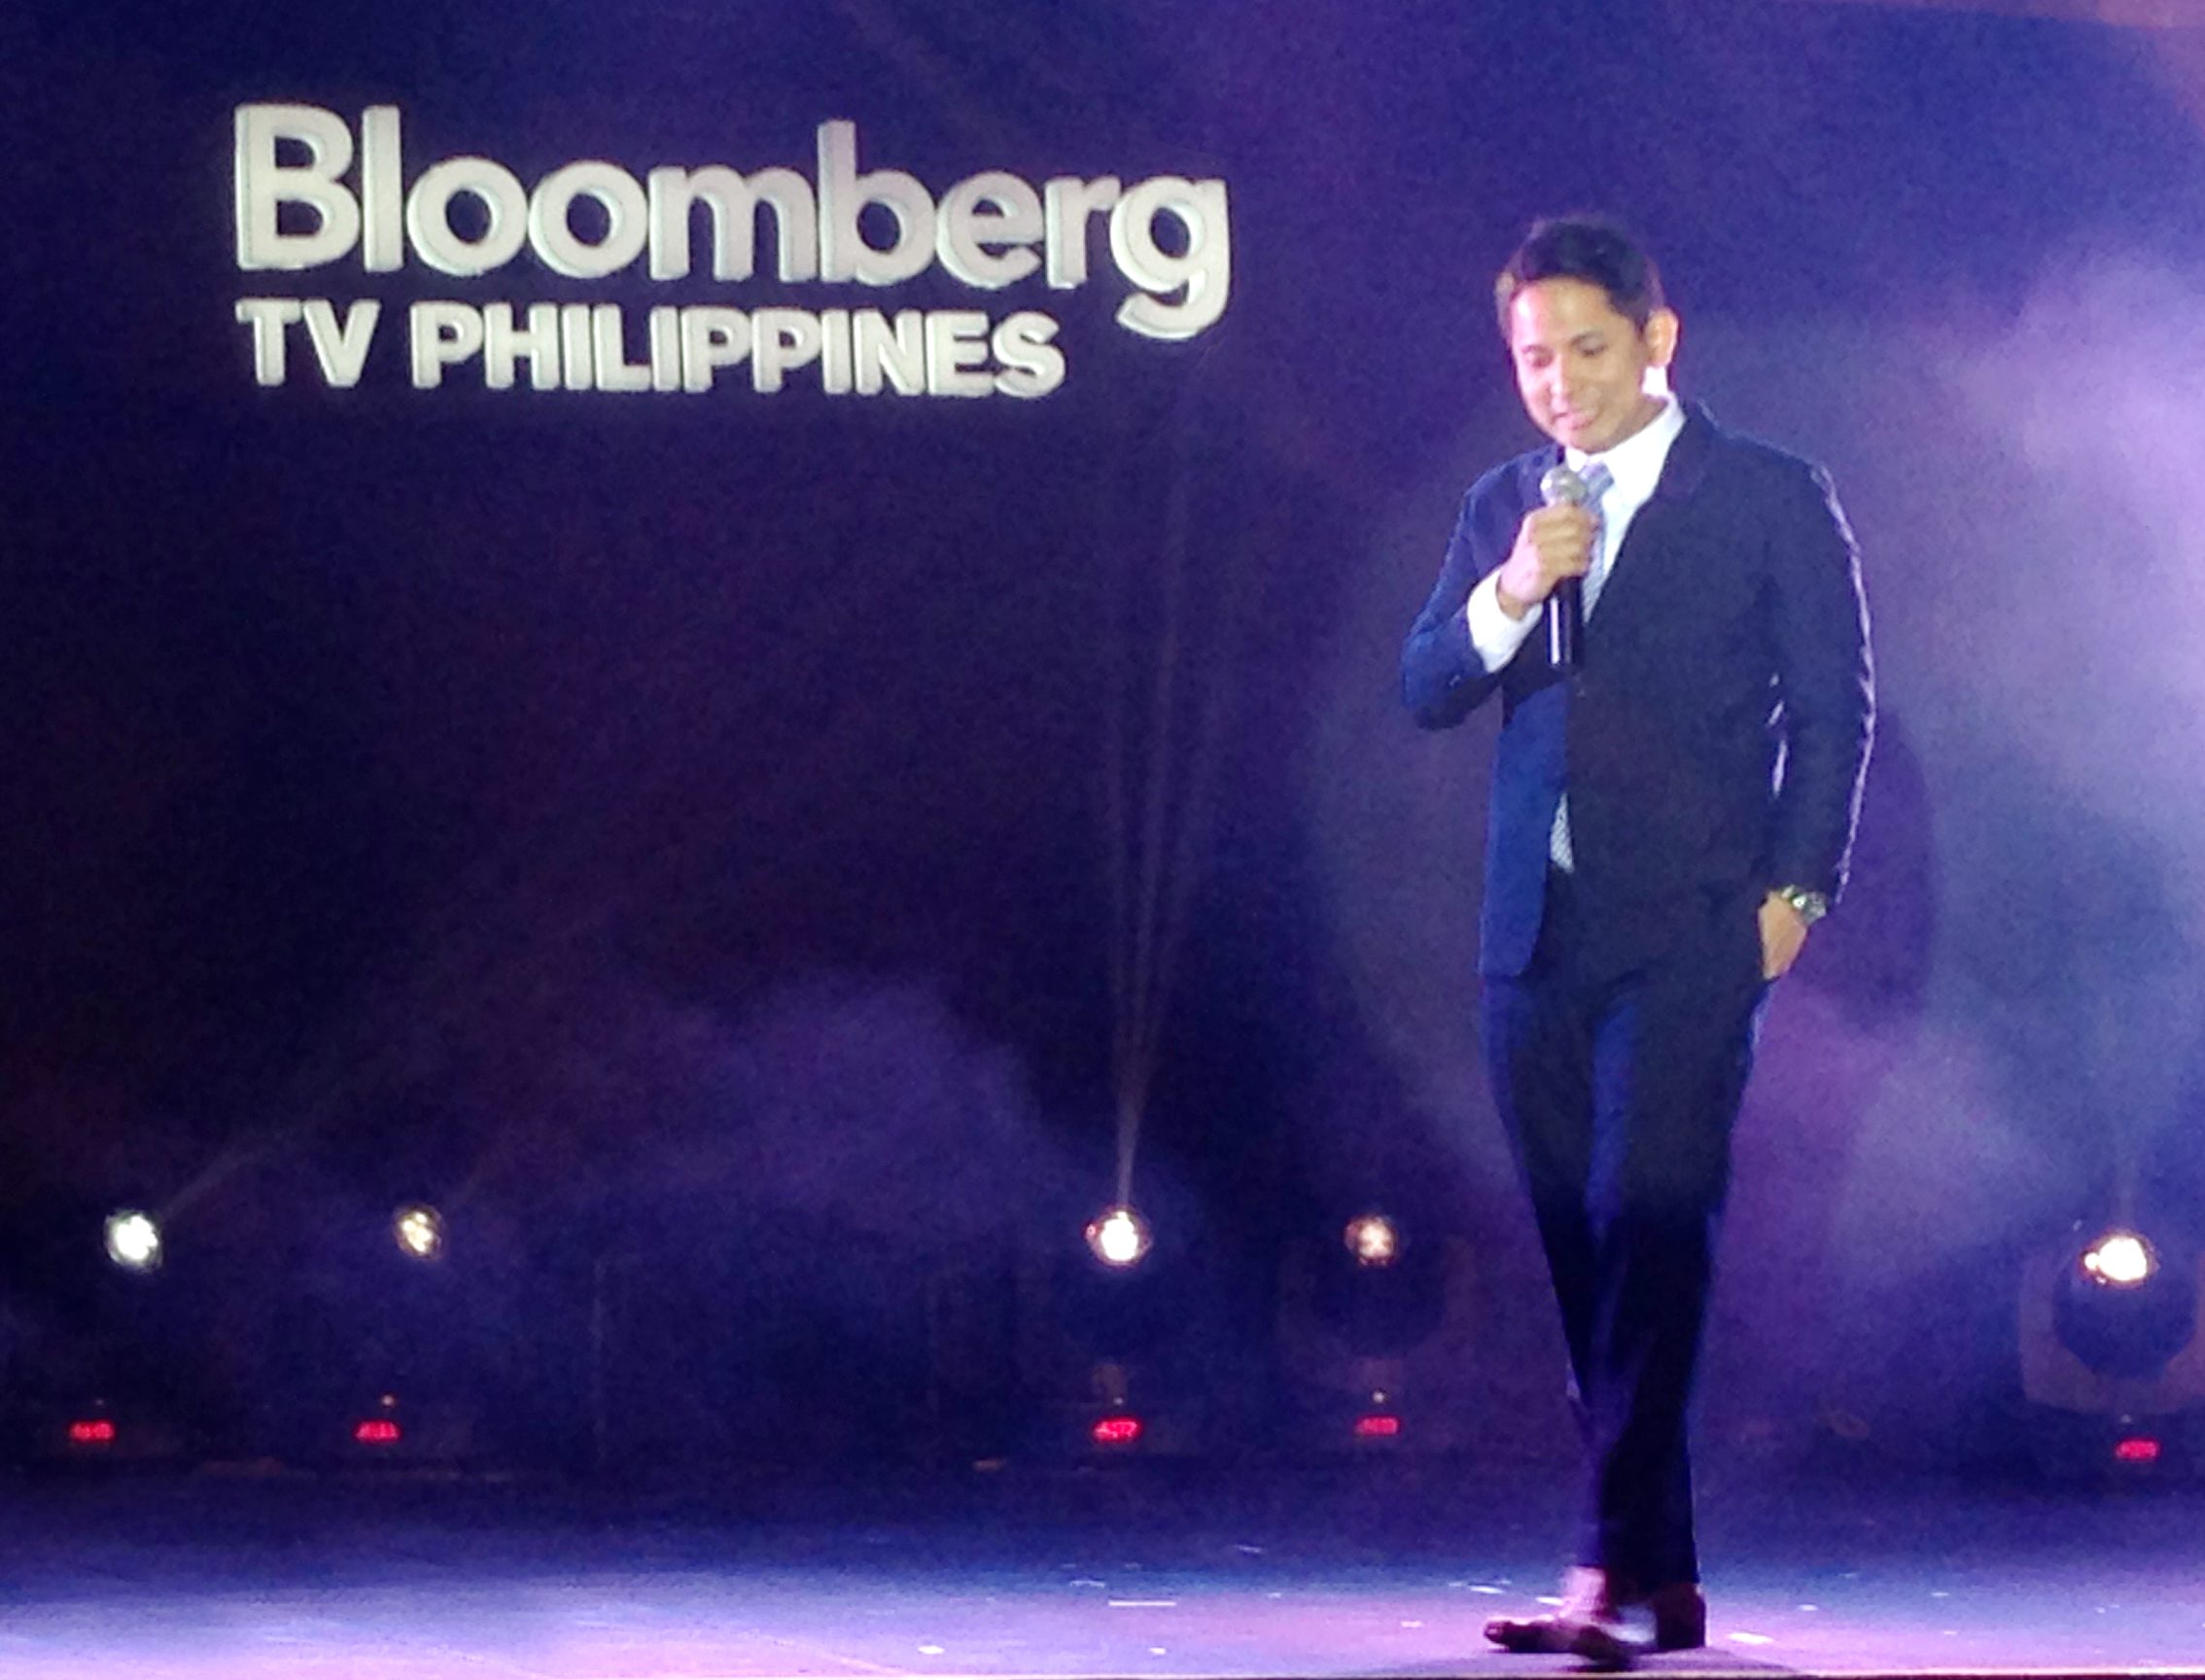 Bloomberg TV Philippines expects to break even in 2016